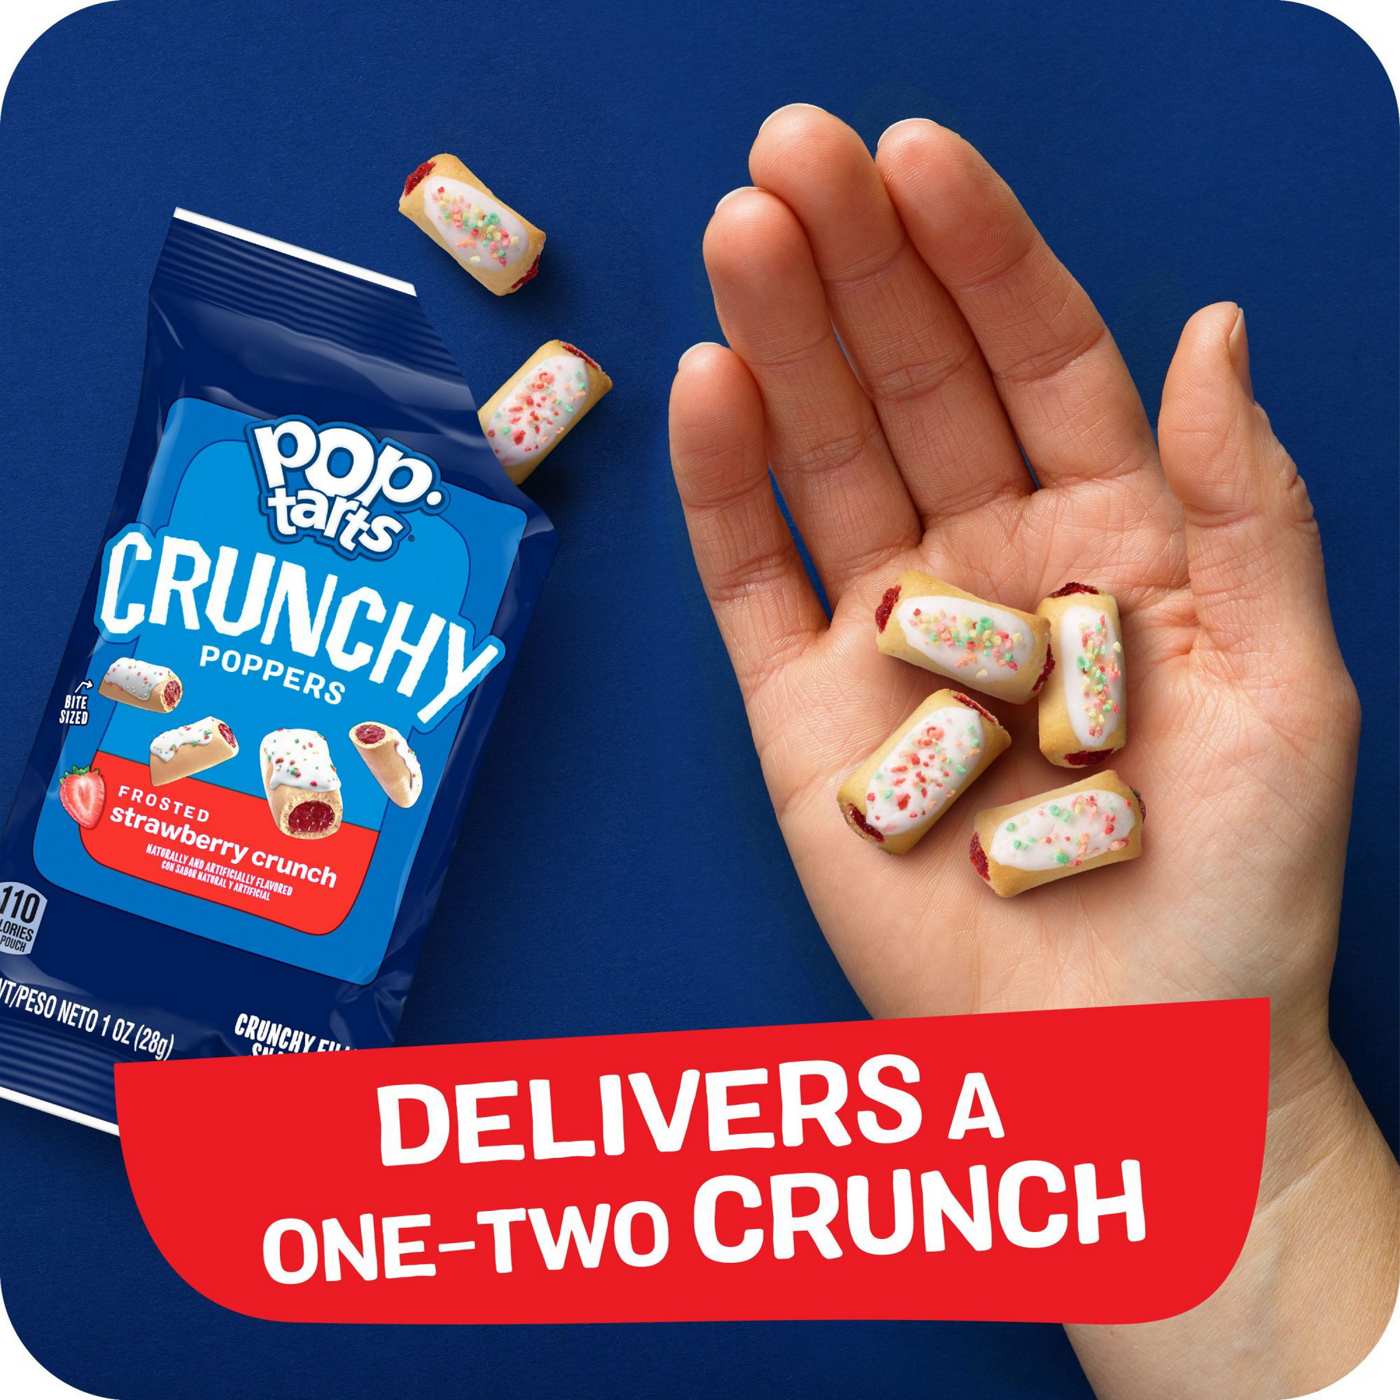 Pop-Tarts Crunchy Poppers Frosted Strawberry Crunch Crunchy Filled Snack Pieces; image 6 of 6